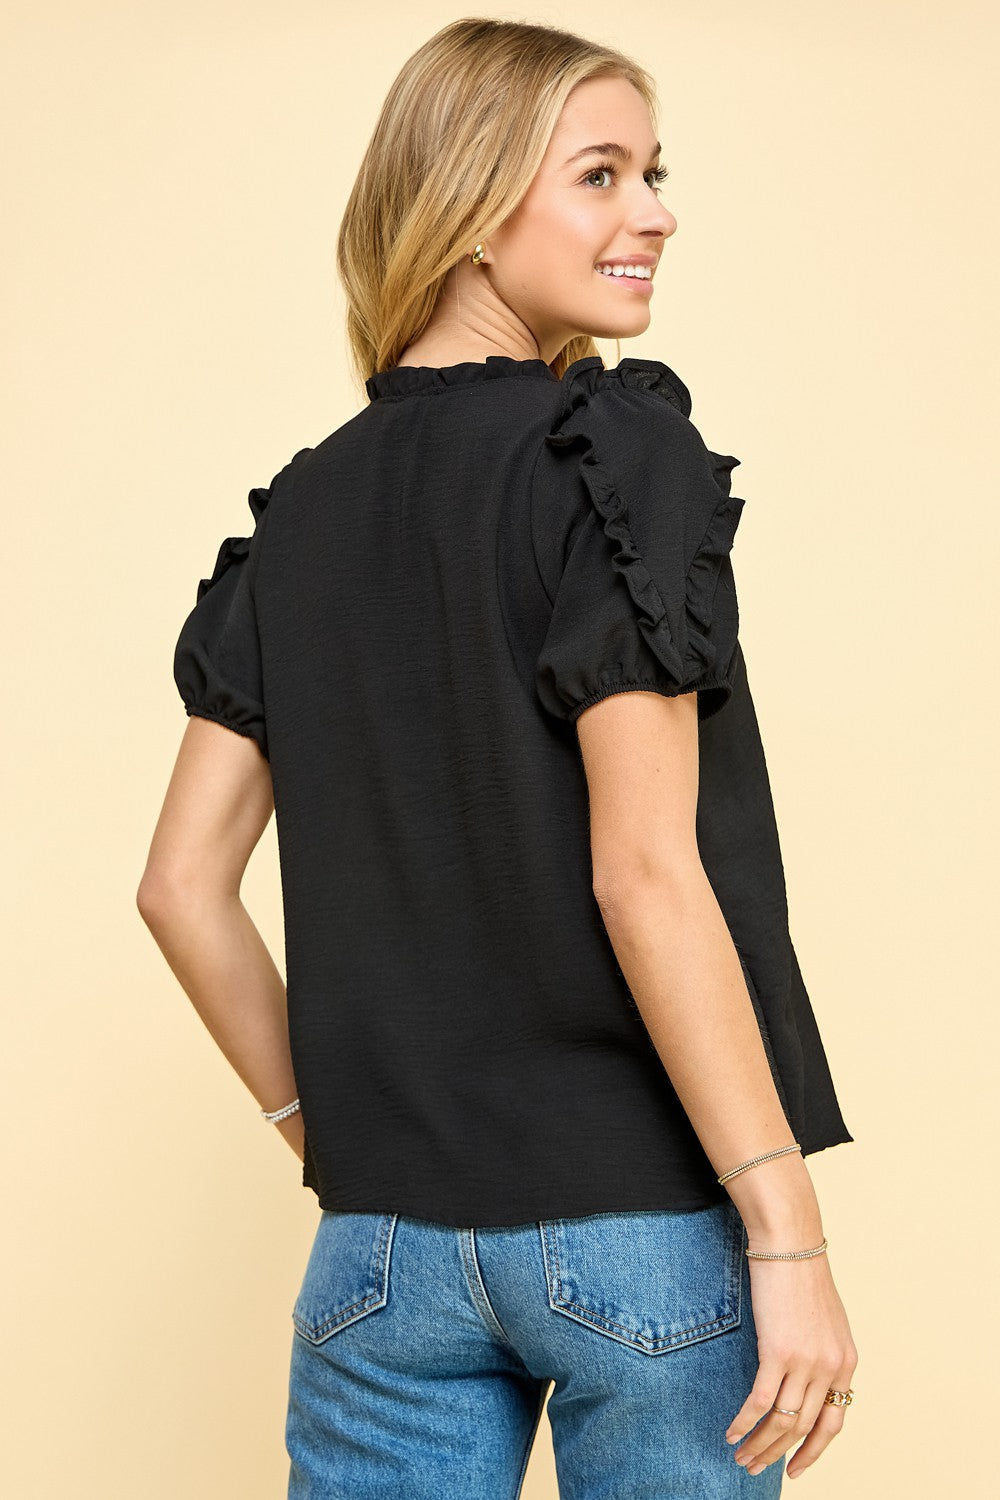 The back view of a woman wearing a Les Amis Fashion Black | Solid Ruffled Sleeves Top.